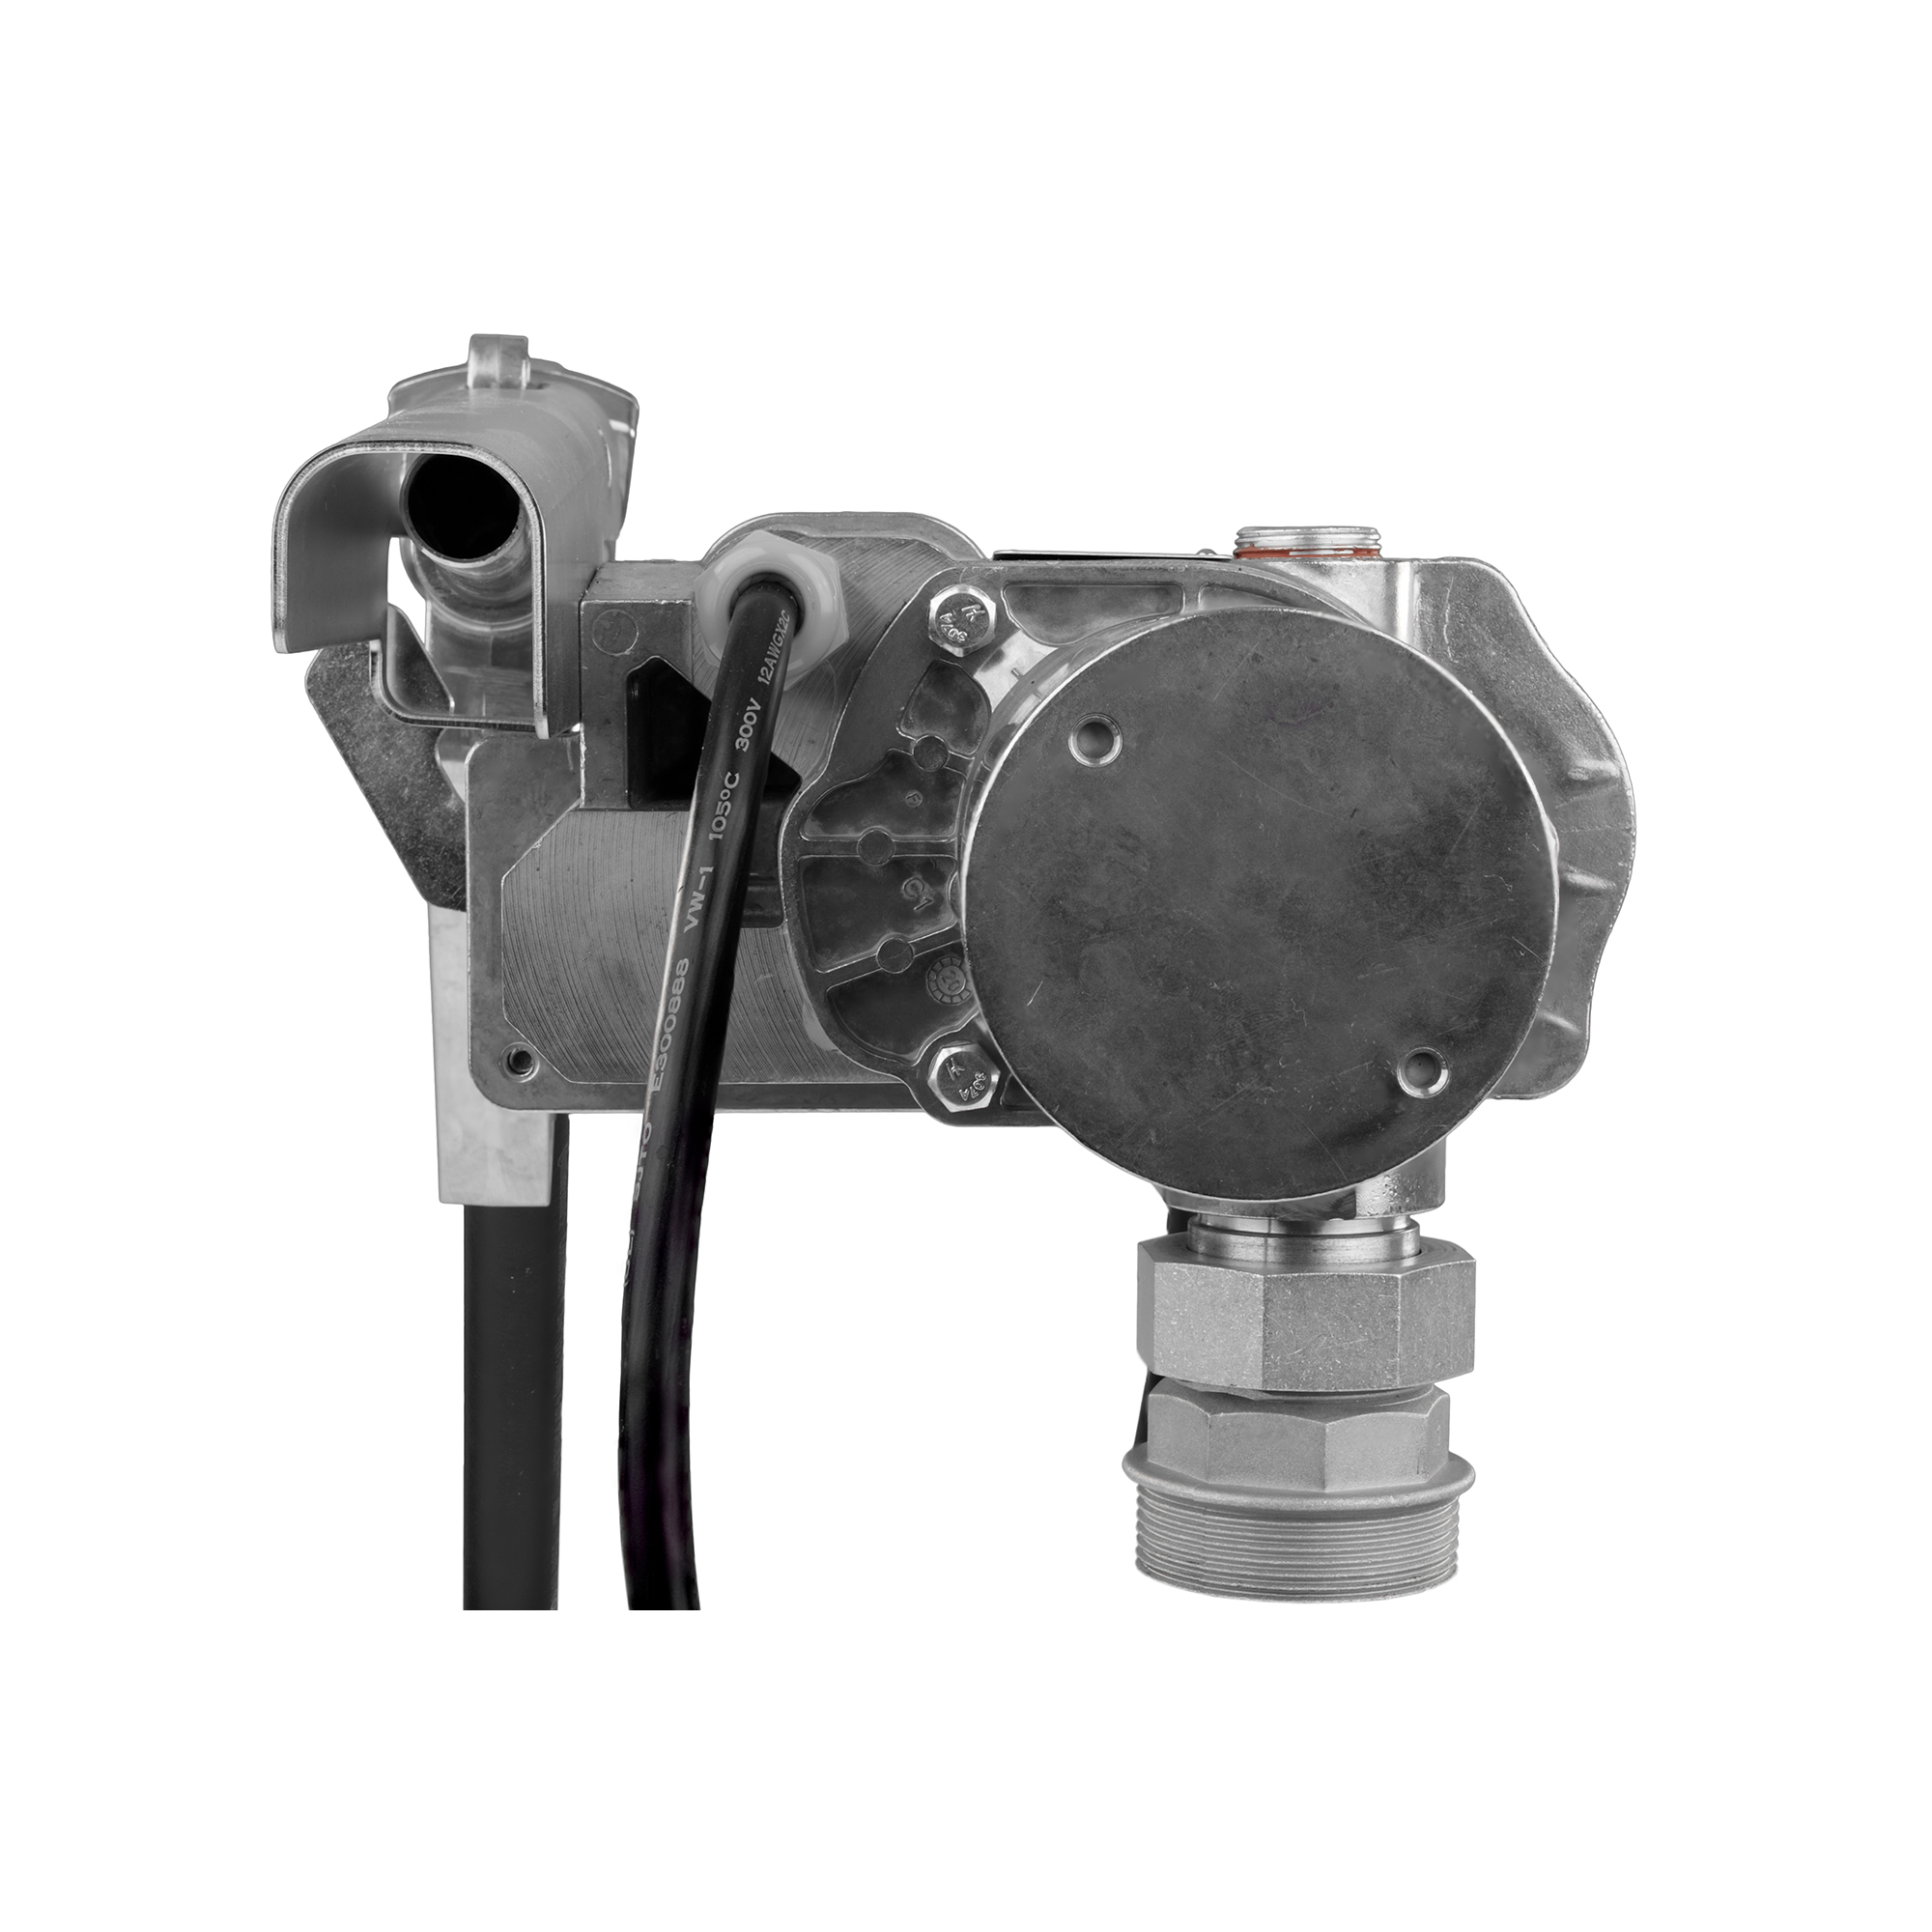 GPI 12V Fuel Transfer Pump with Spin Collar — 15 GPM, Manual Nozzle, Hose,  Model# M150S-MU